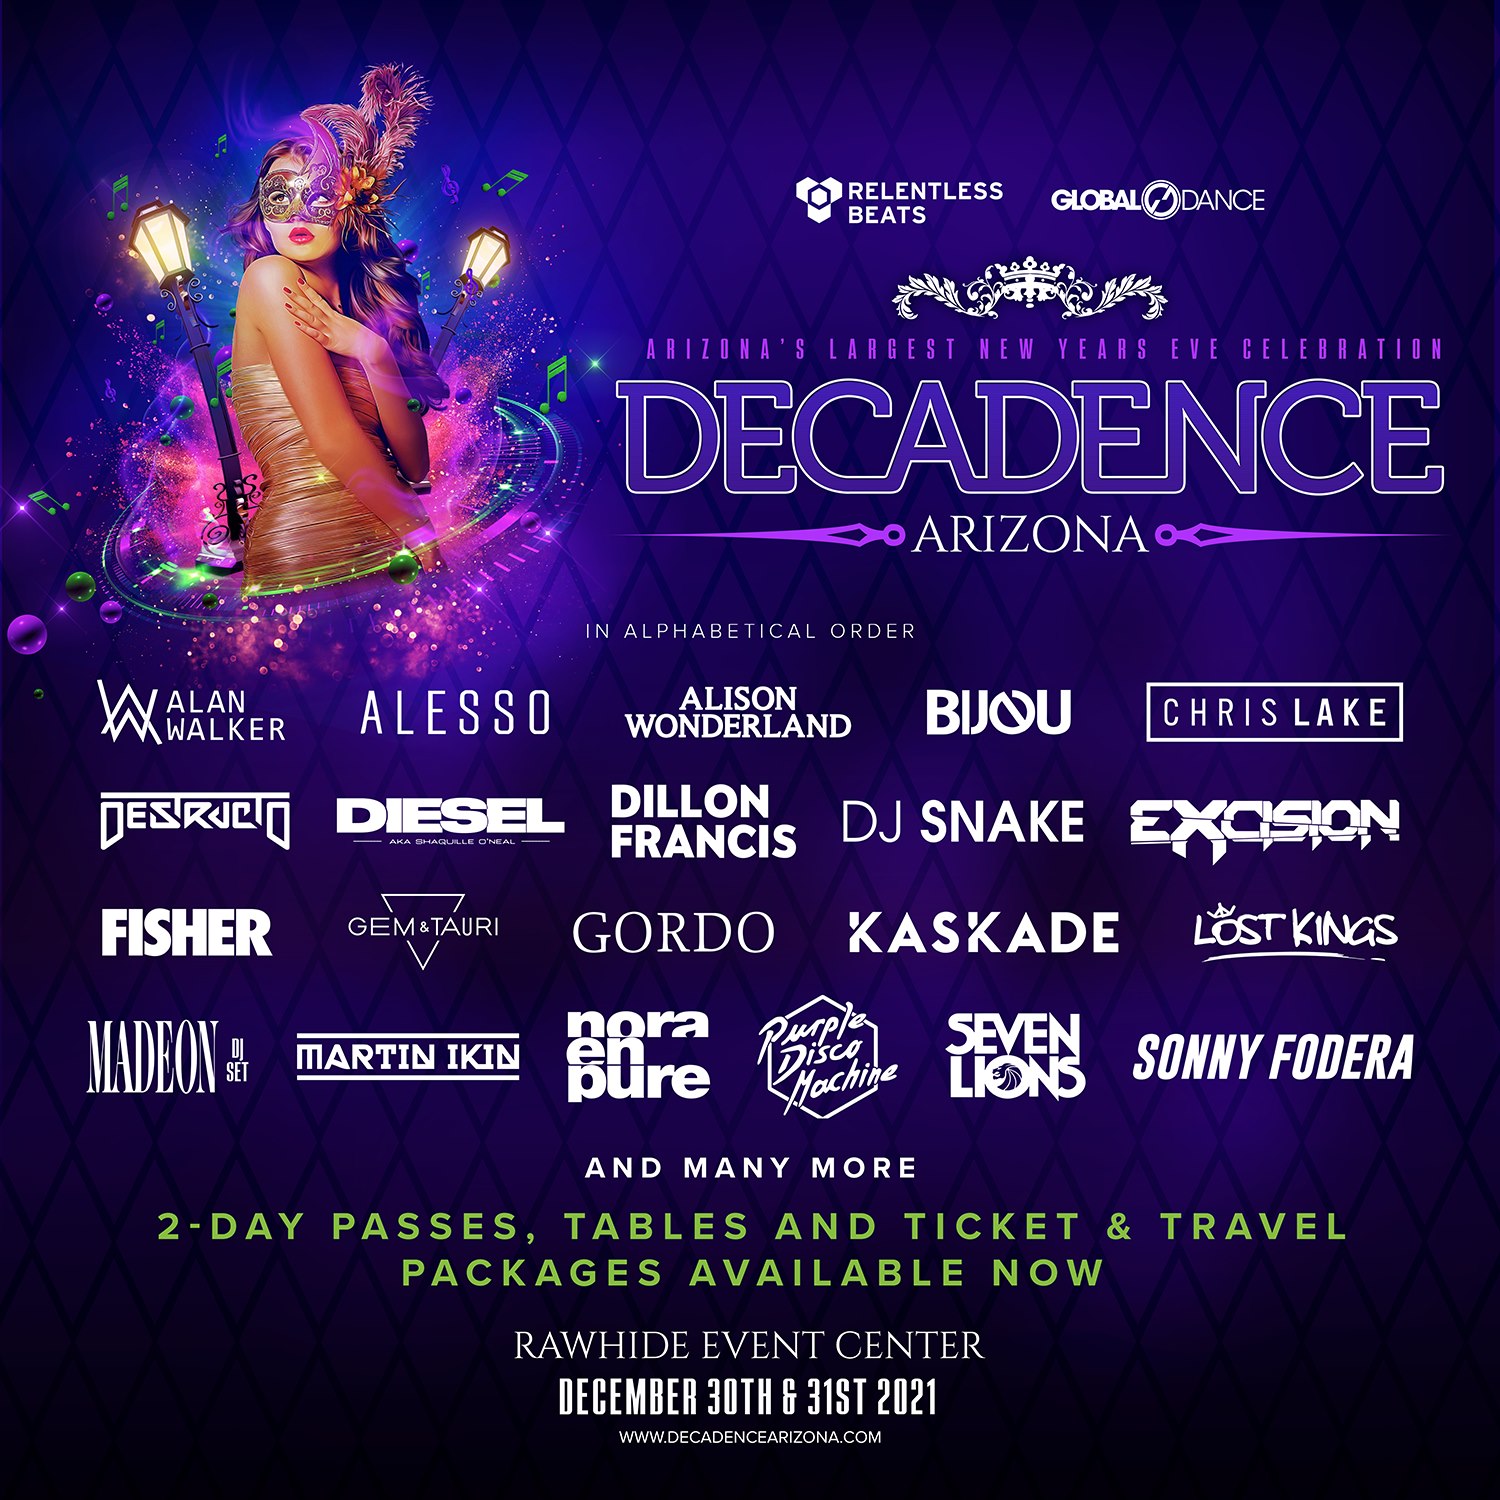 Decadence AZ Hosts NYE With Kaskade, Seven Lions, and More